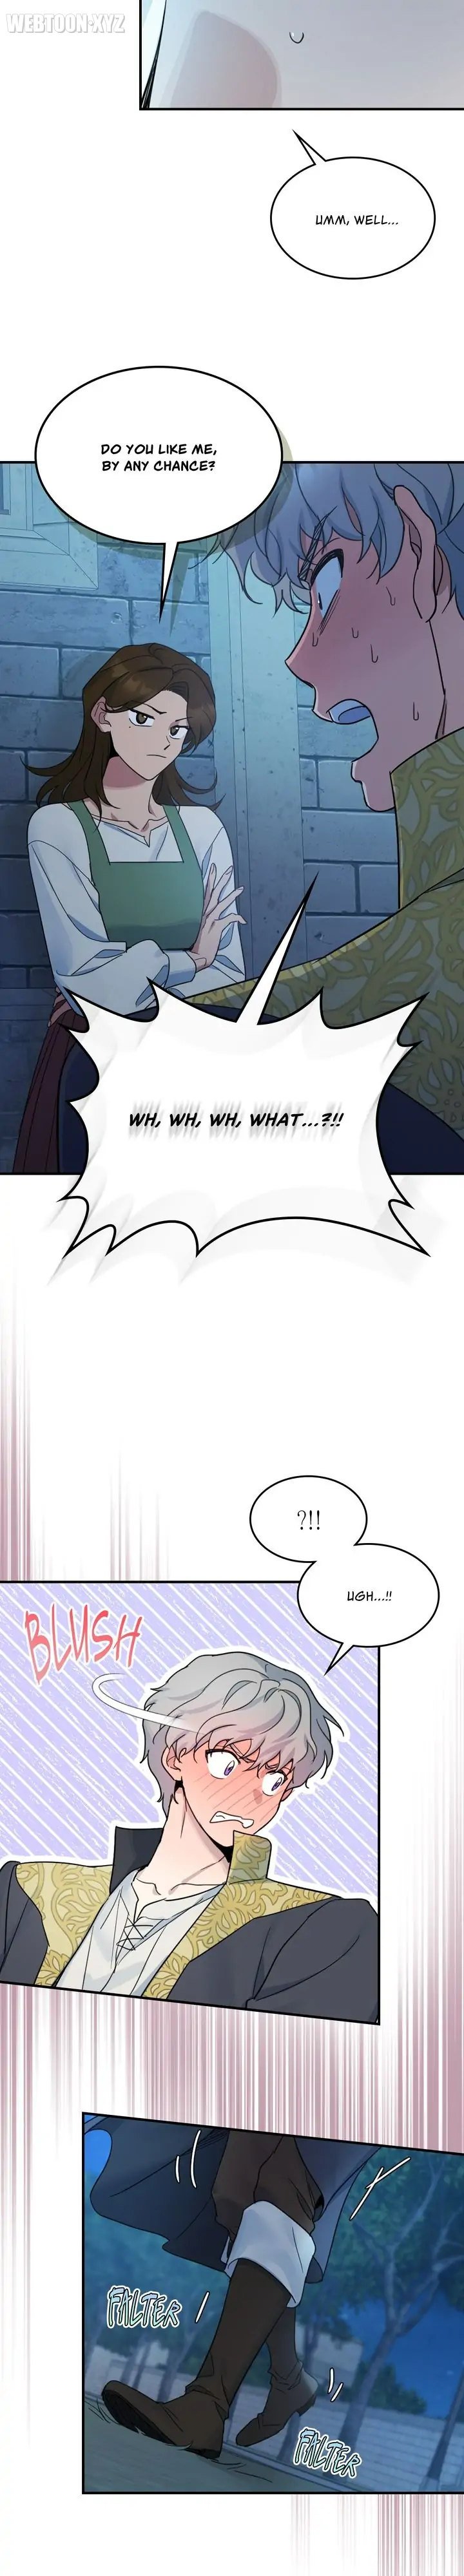 the-lady-and-the-beast-chap-89-22